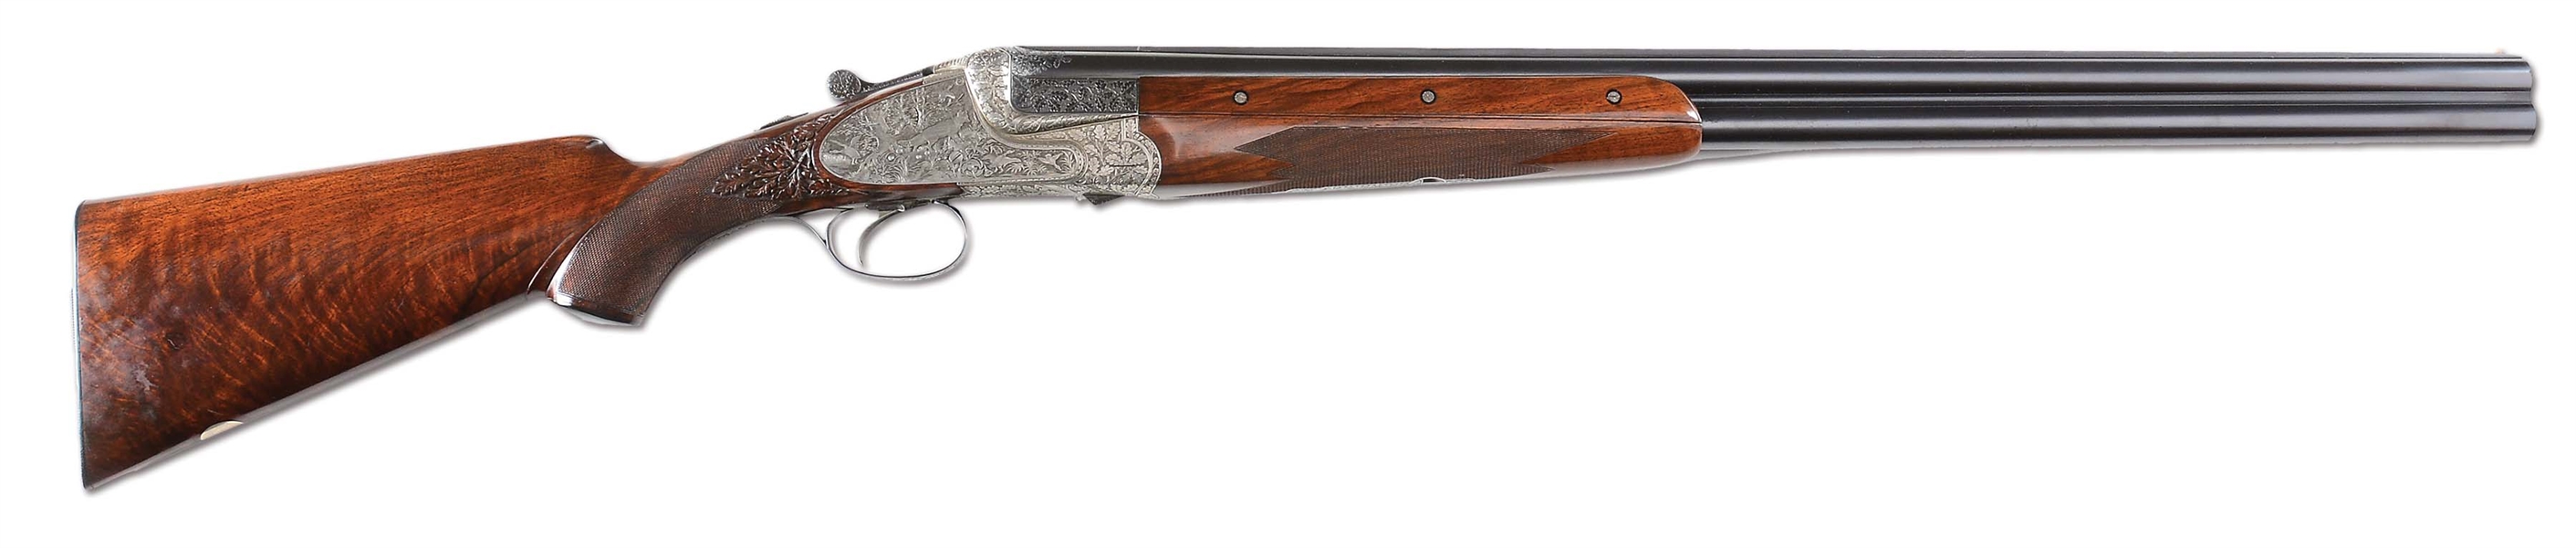 (C) HIGH ORIGINAL CONDITION MERKEL 203E OVER / UNDER SHOTGUN WITH FINE RELIEF ENGRAVING AND ATTRACTIVE OAK LEAF CARVING ON STOCK.